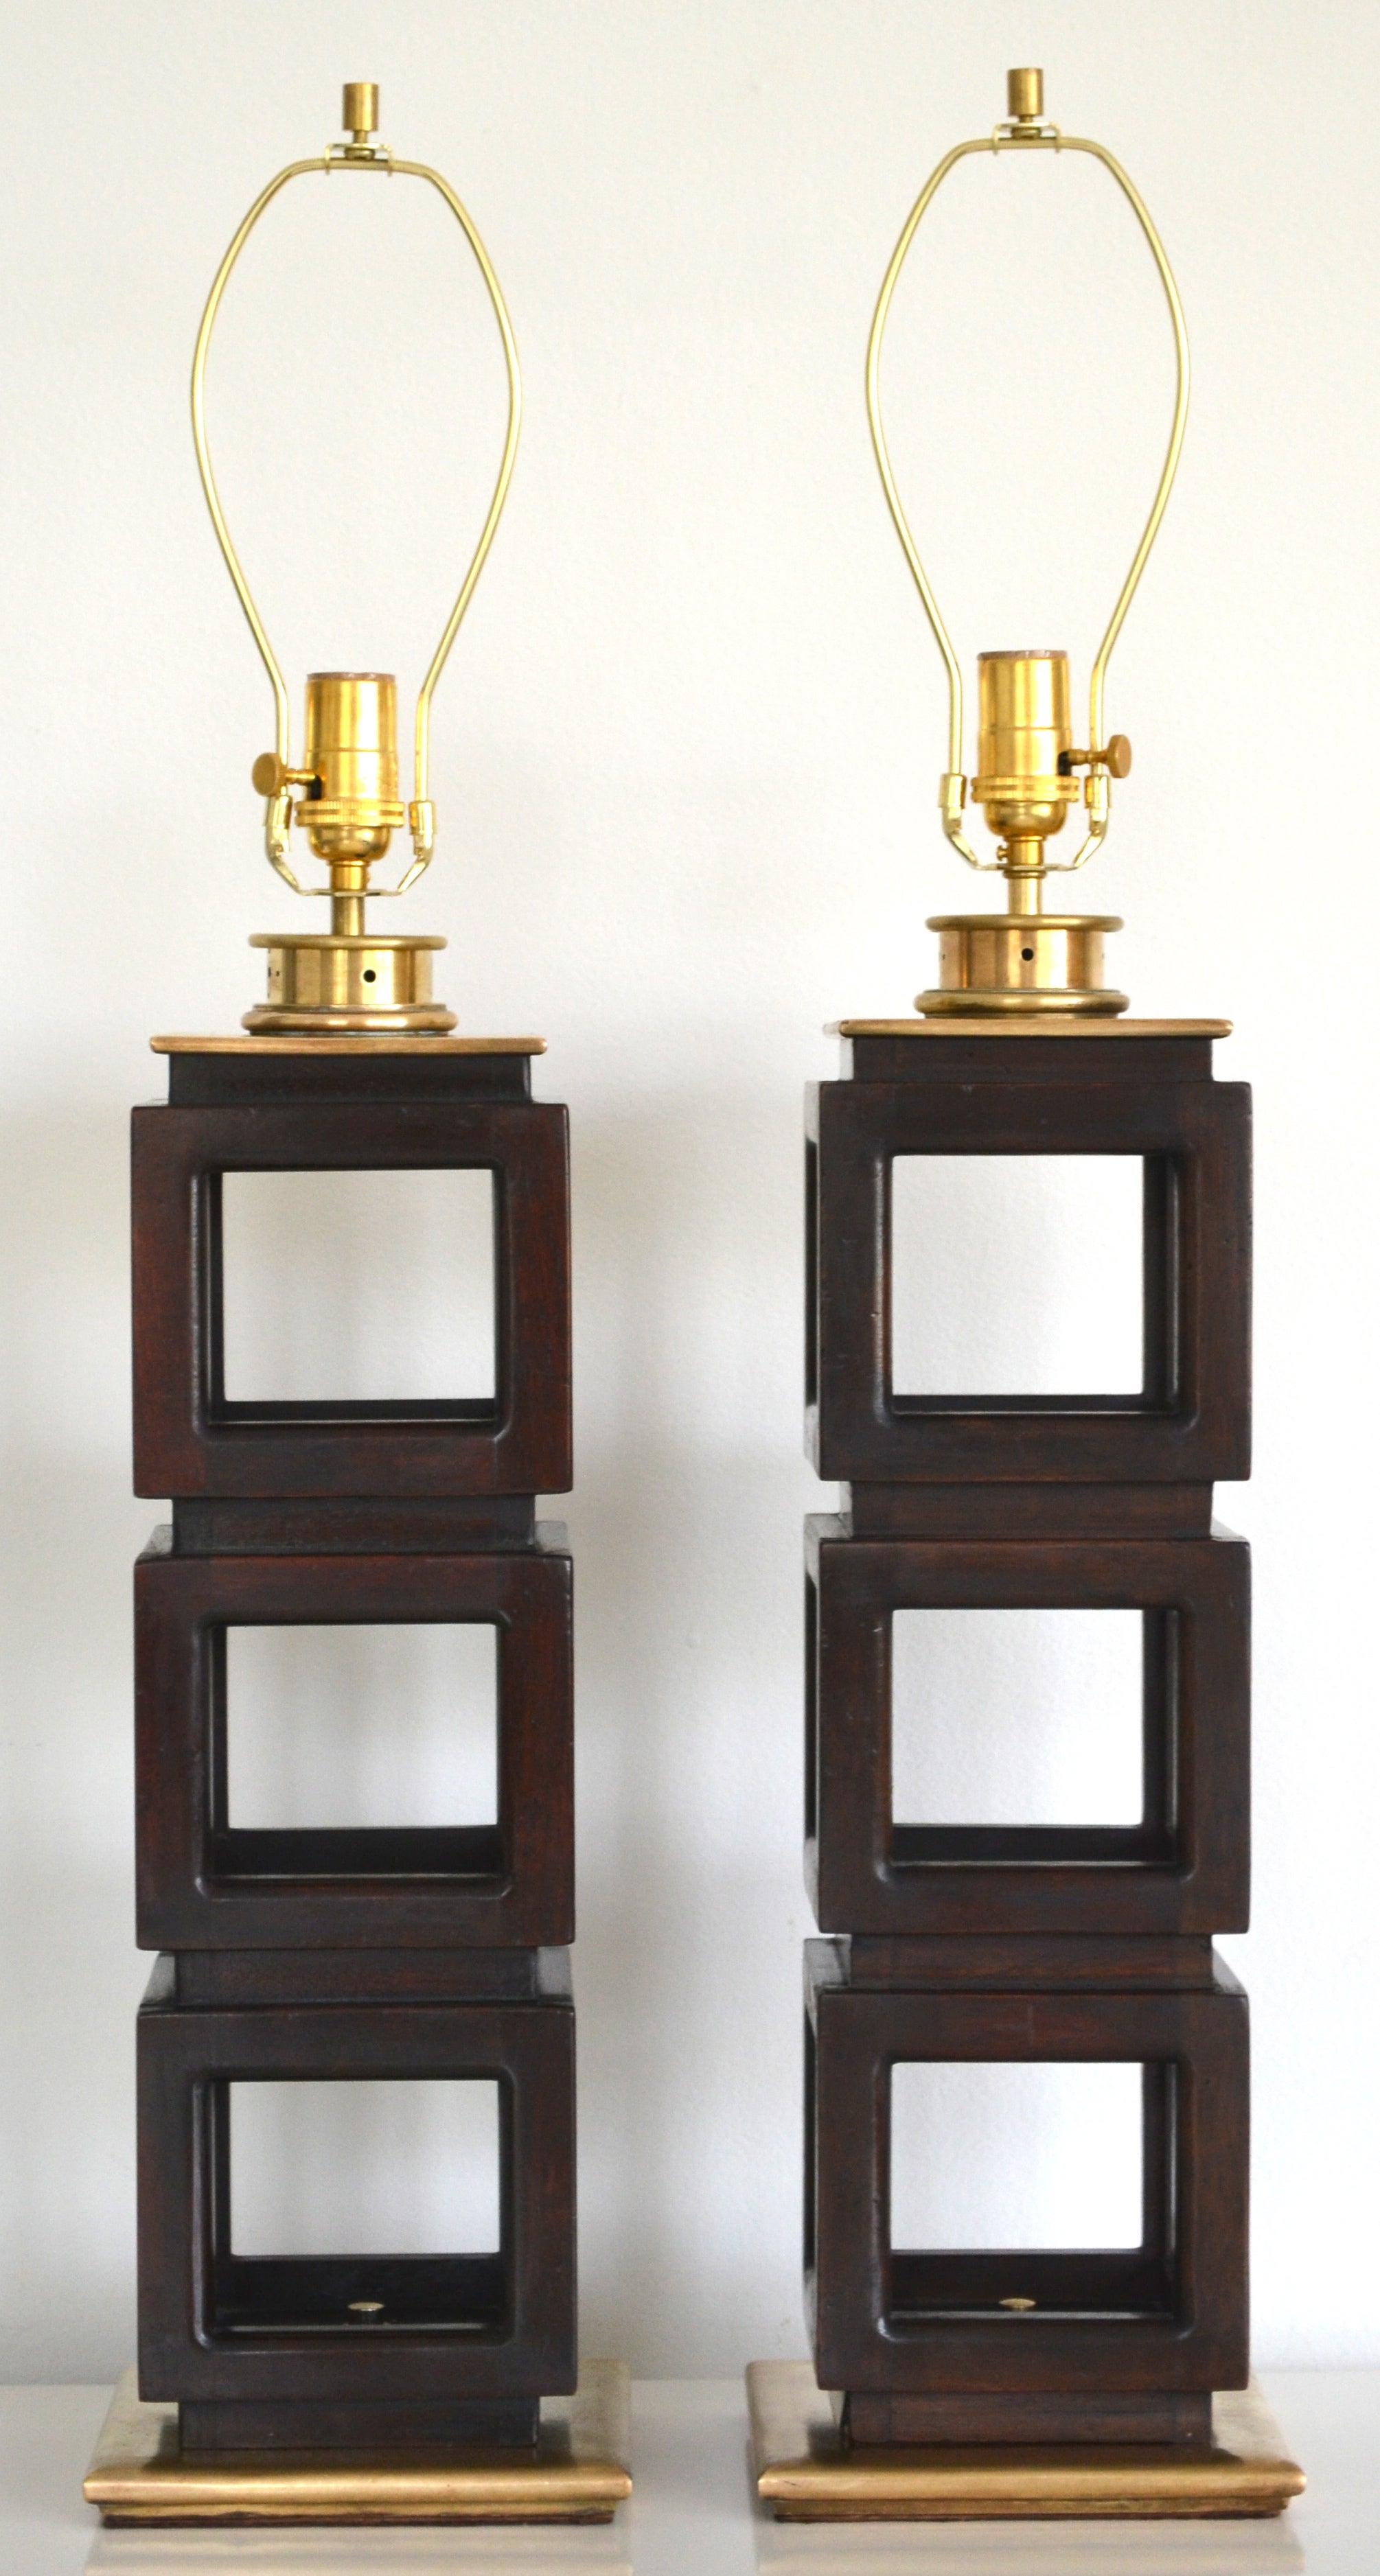 Pair of Mid-Century Geometric Form Table Lamps by Edwin Cole